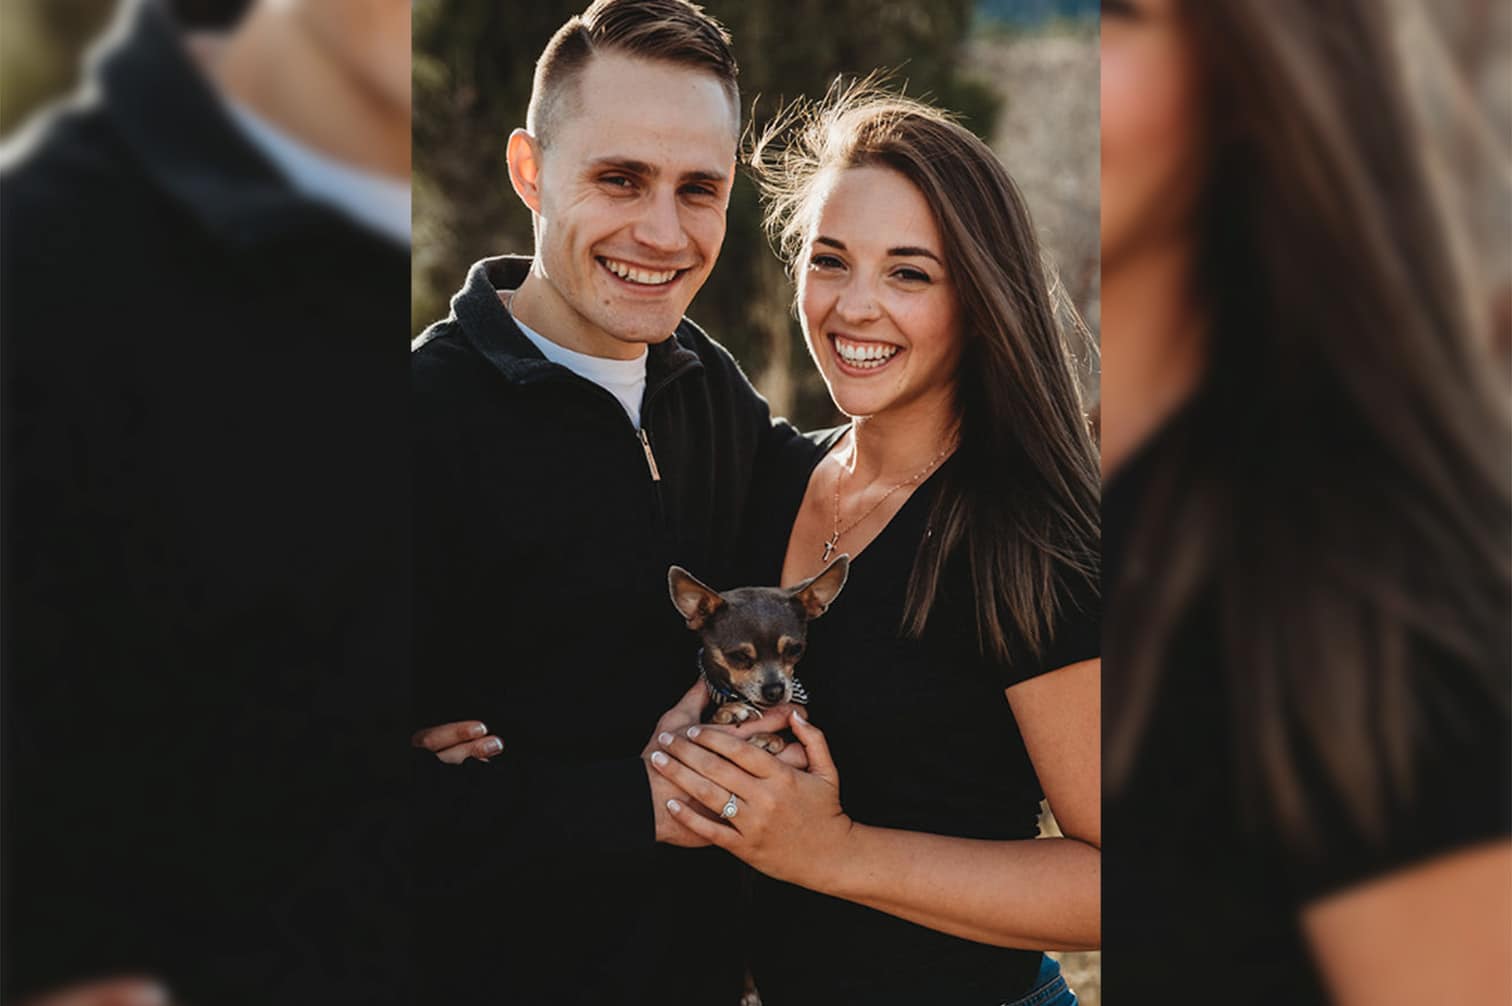 Michelle Golden posed with her dog and husband